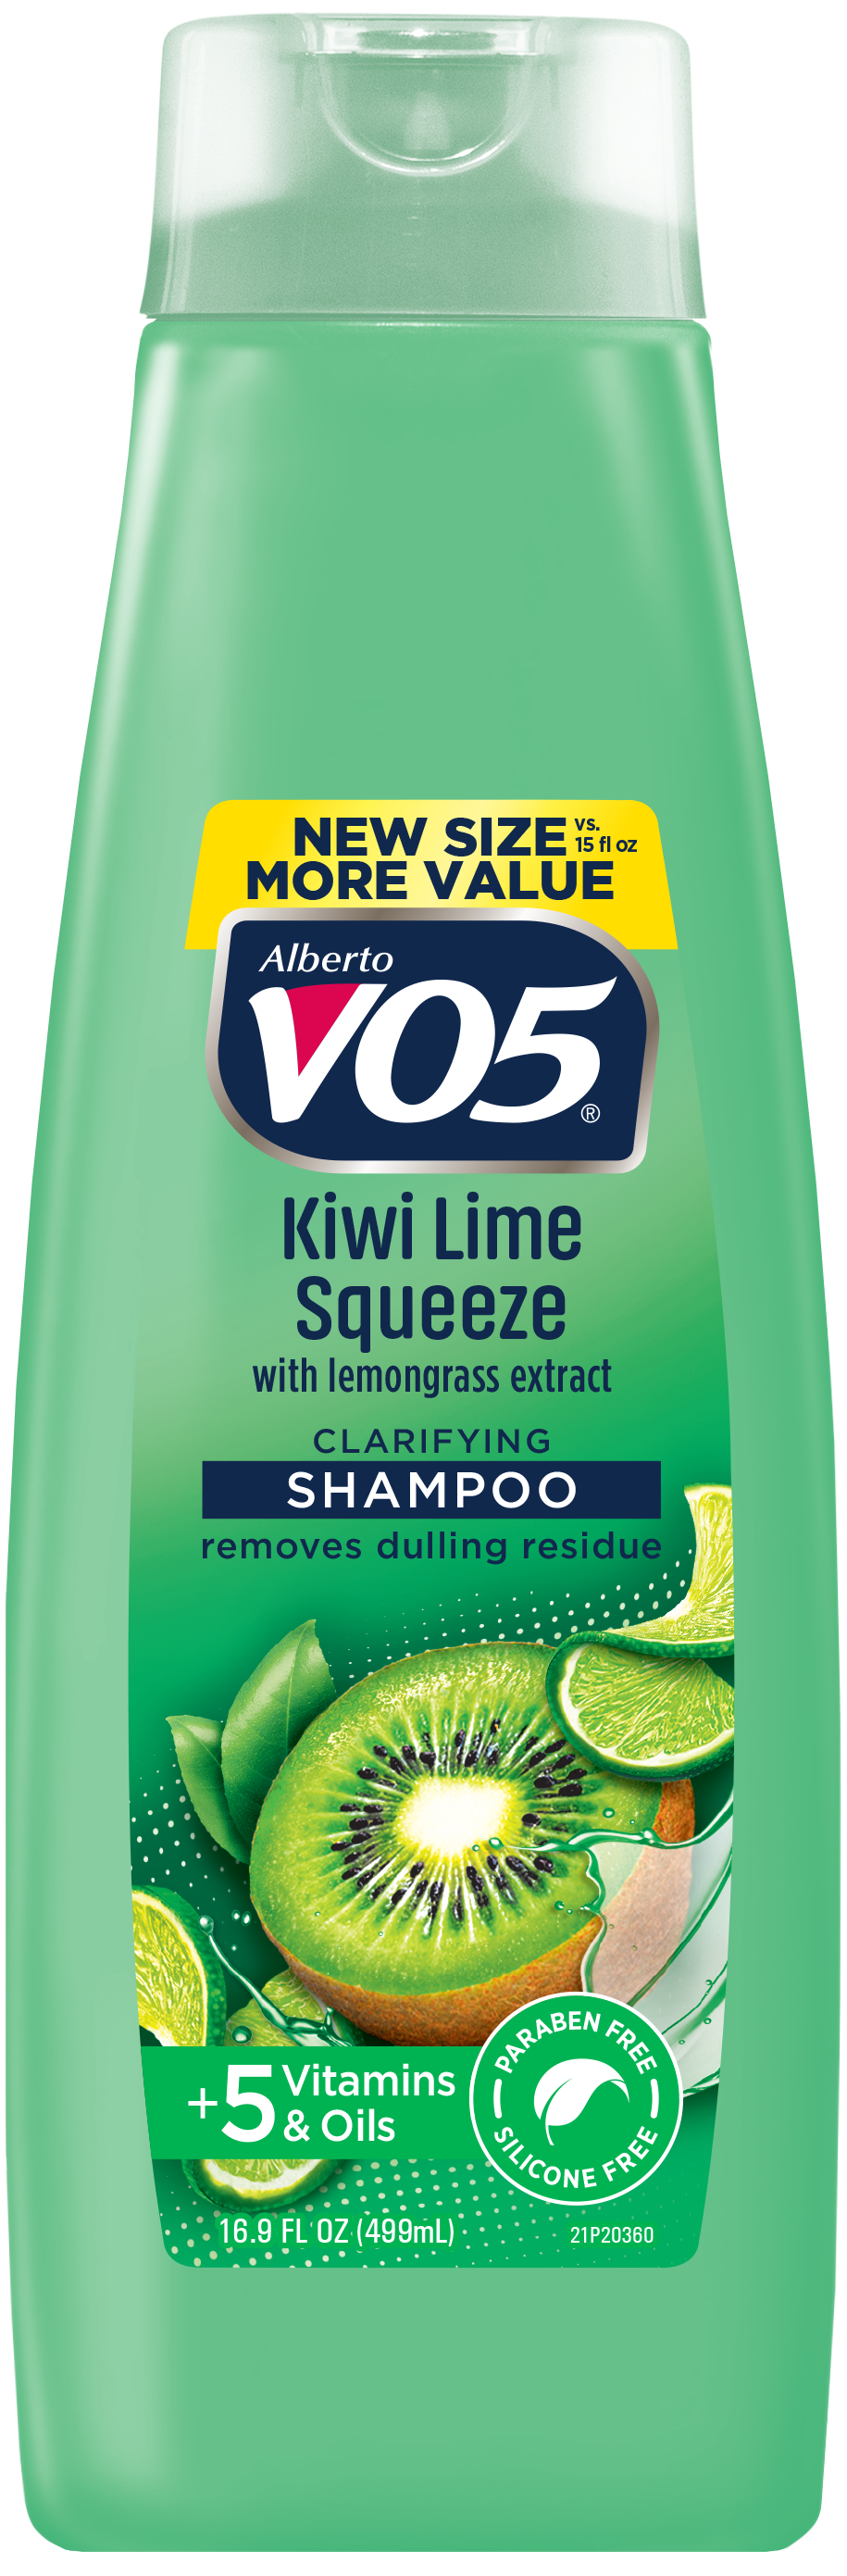 Alberto VO5 Kiwi Lime Squeeze Clarifying Shampoo with Vitamin E & C, for All Hair Types, 16.9 fl oz - image 1 of 6